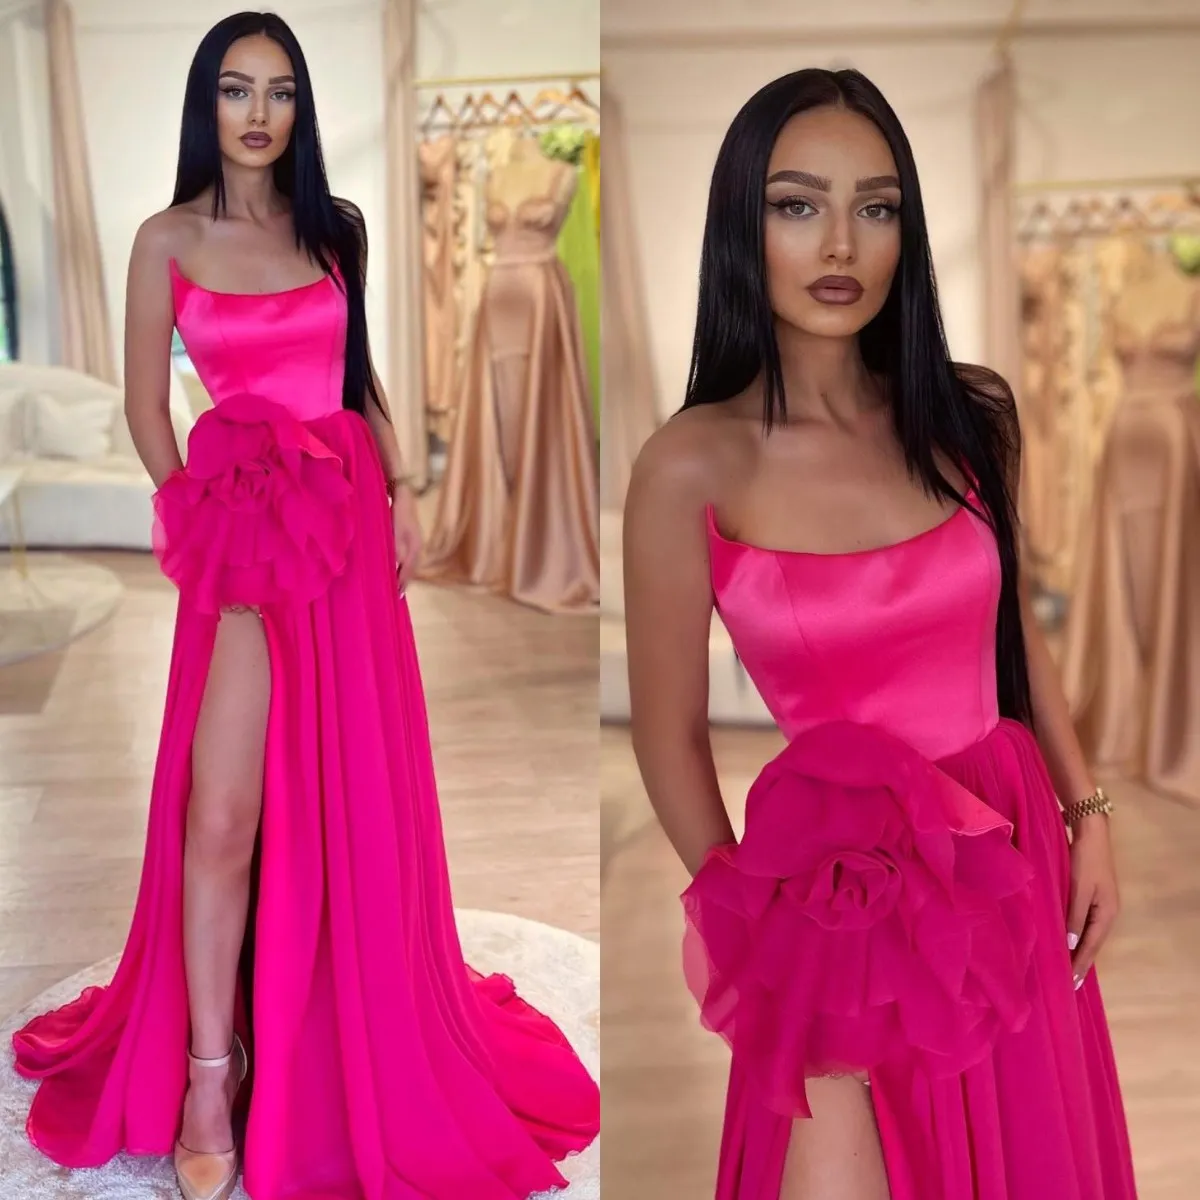 Elegant A Line Rosy Pink Prom Dresses Strapless Flower Waist Evening Gowns Pleats Slit Formal Long Special Ocn Party Dress